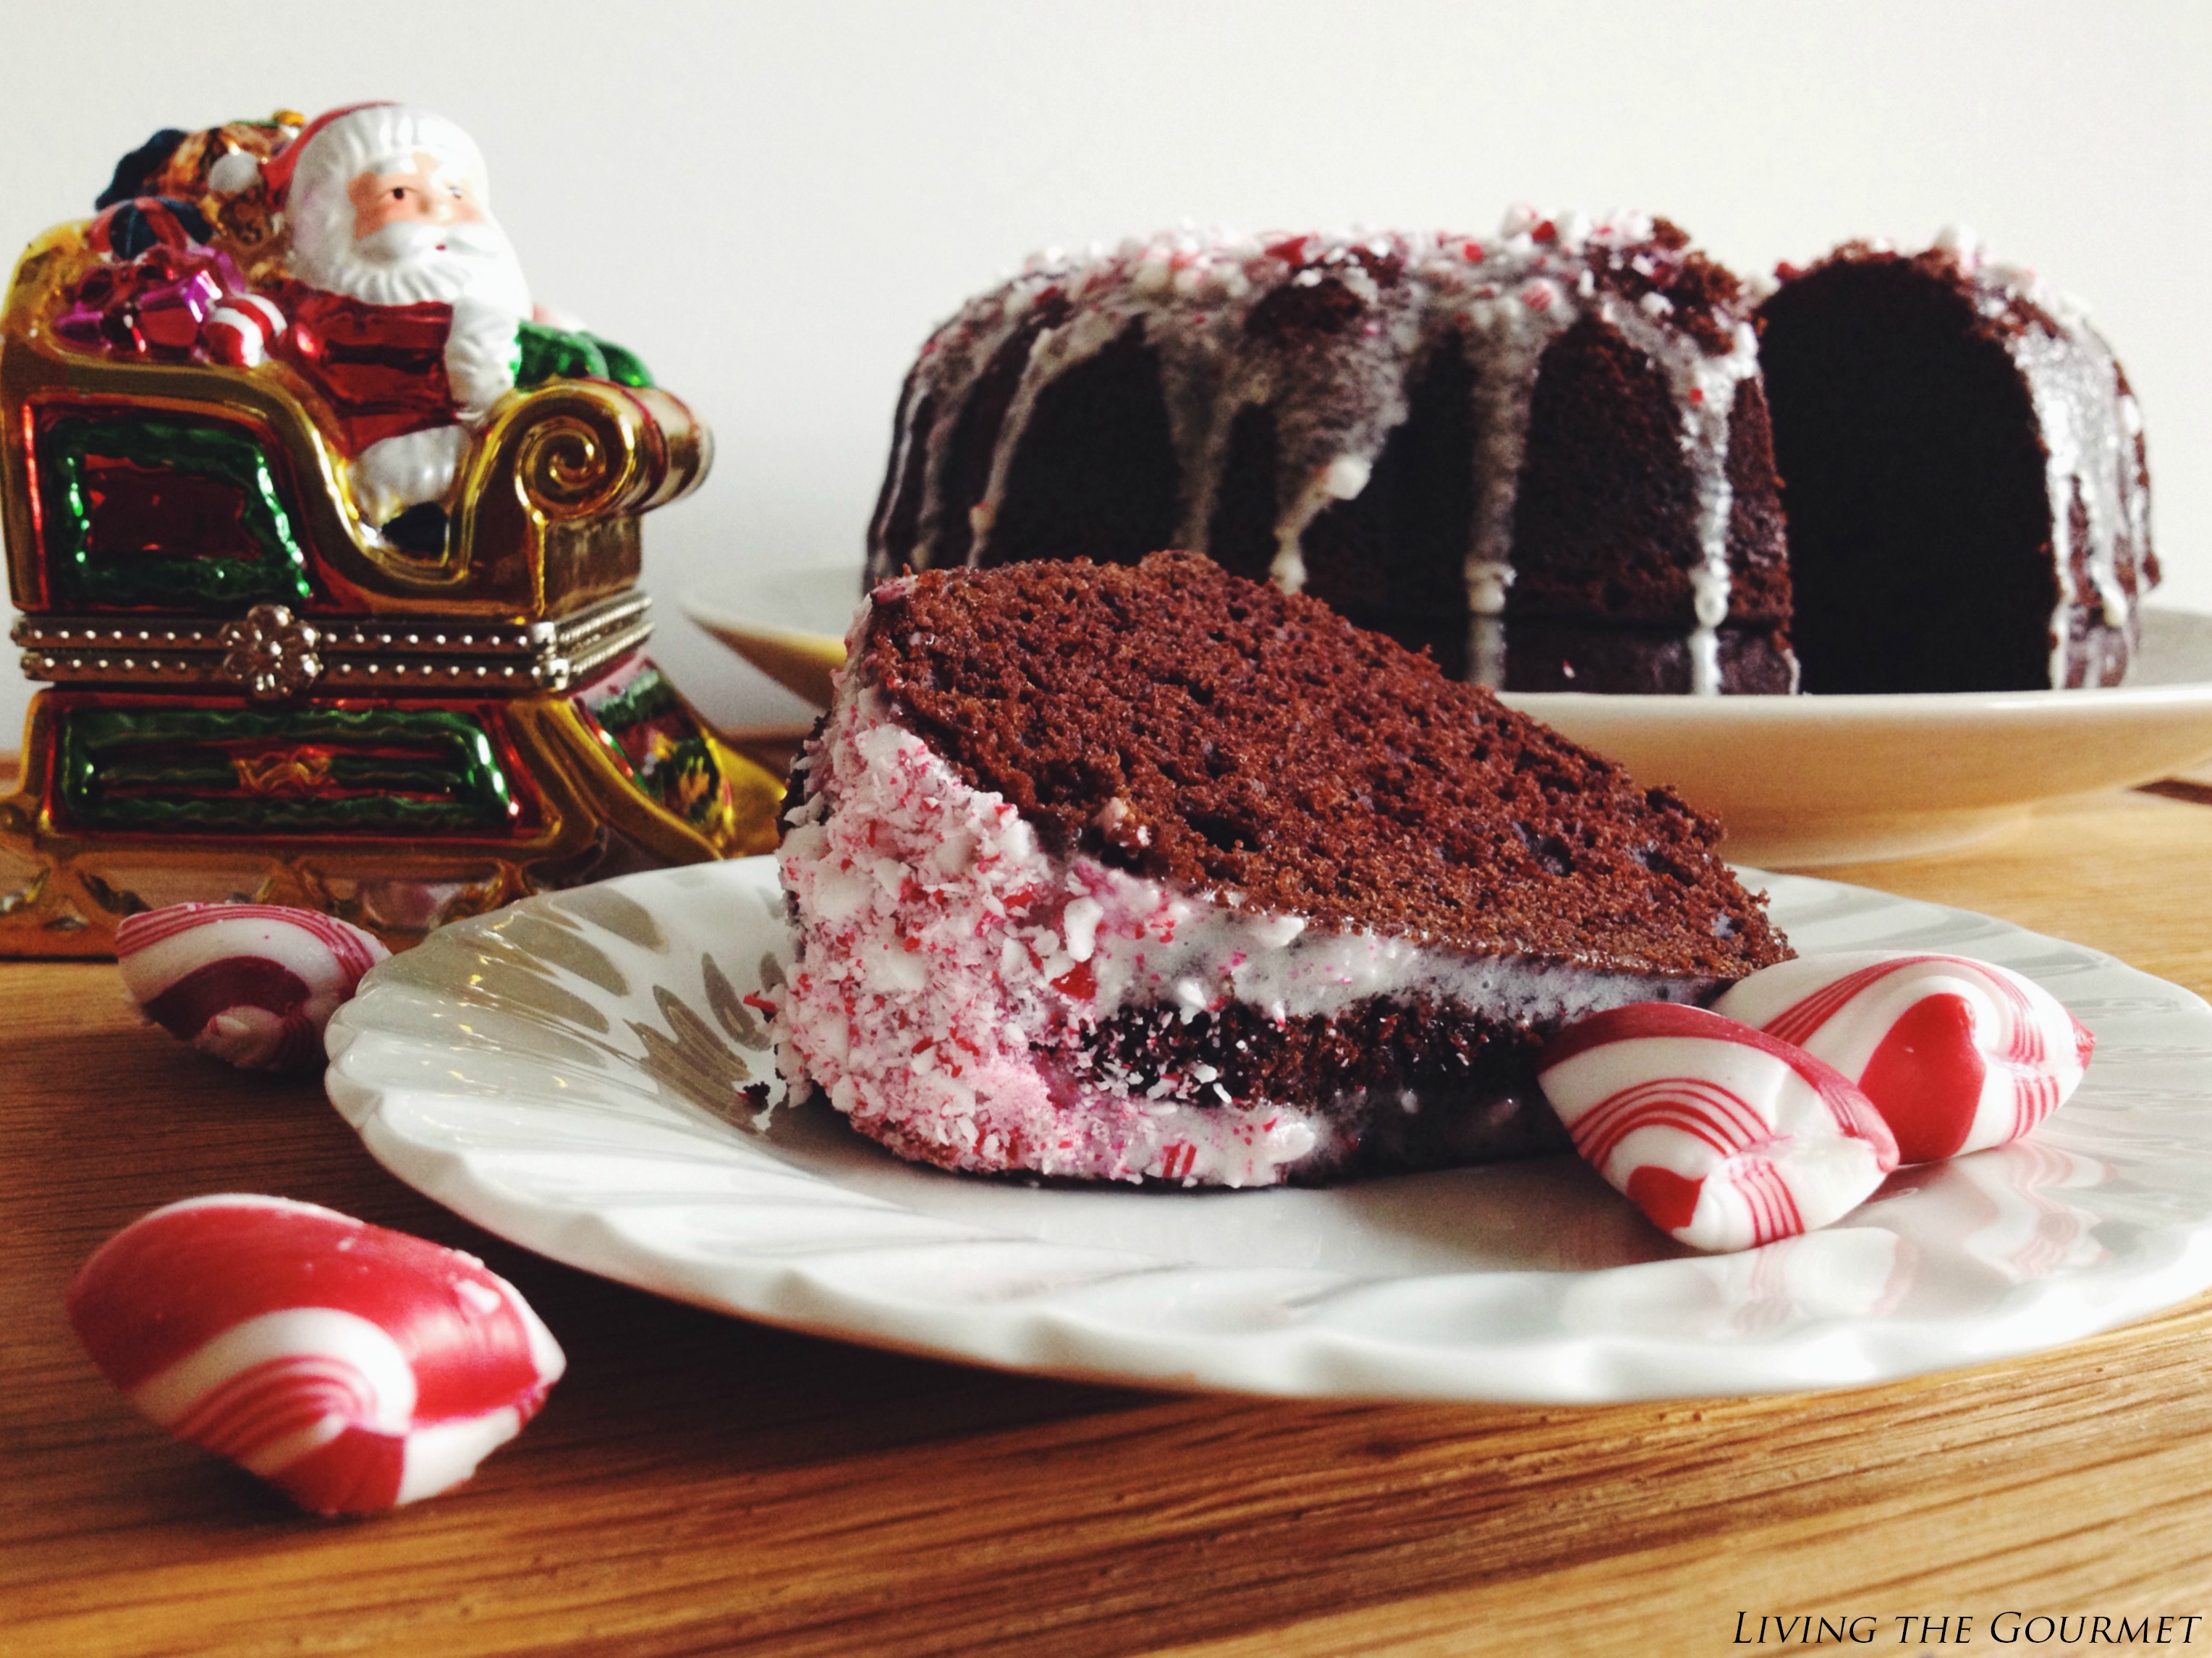 Living the Gourmet: Chocolate Cake w/ Eggnog & Peppermint Drizzle #BundtBakers